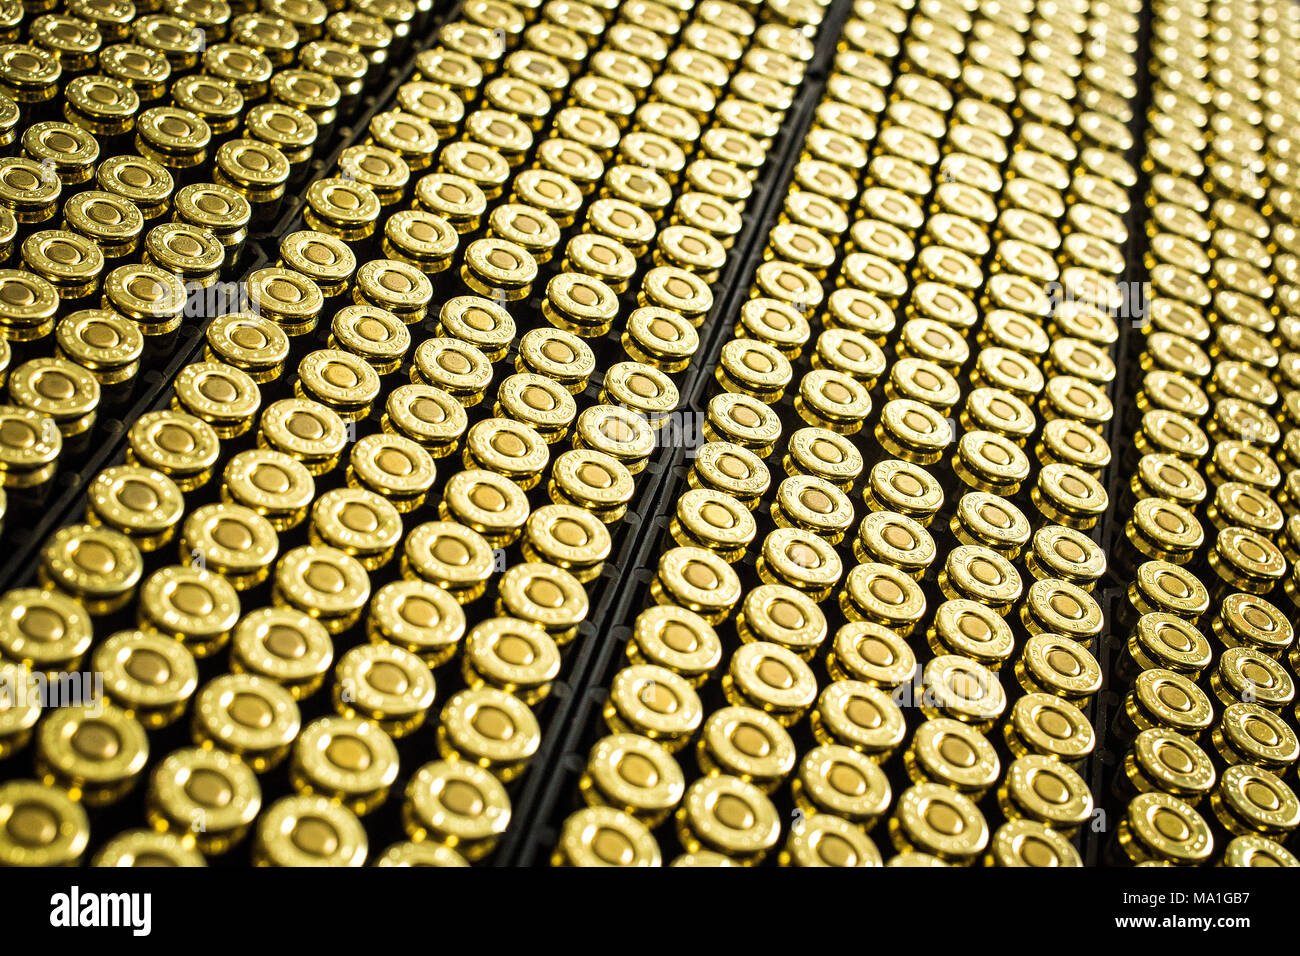 Hundreds of brass ammo rounds lined up together Stock Photo